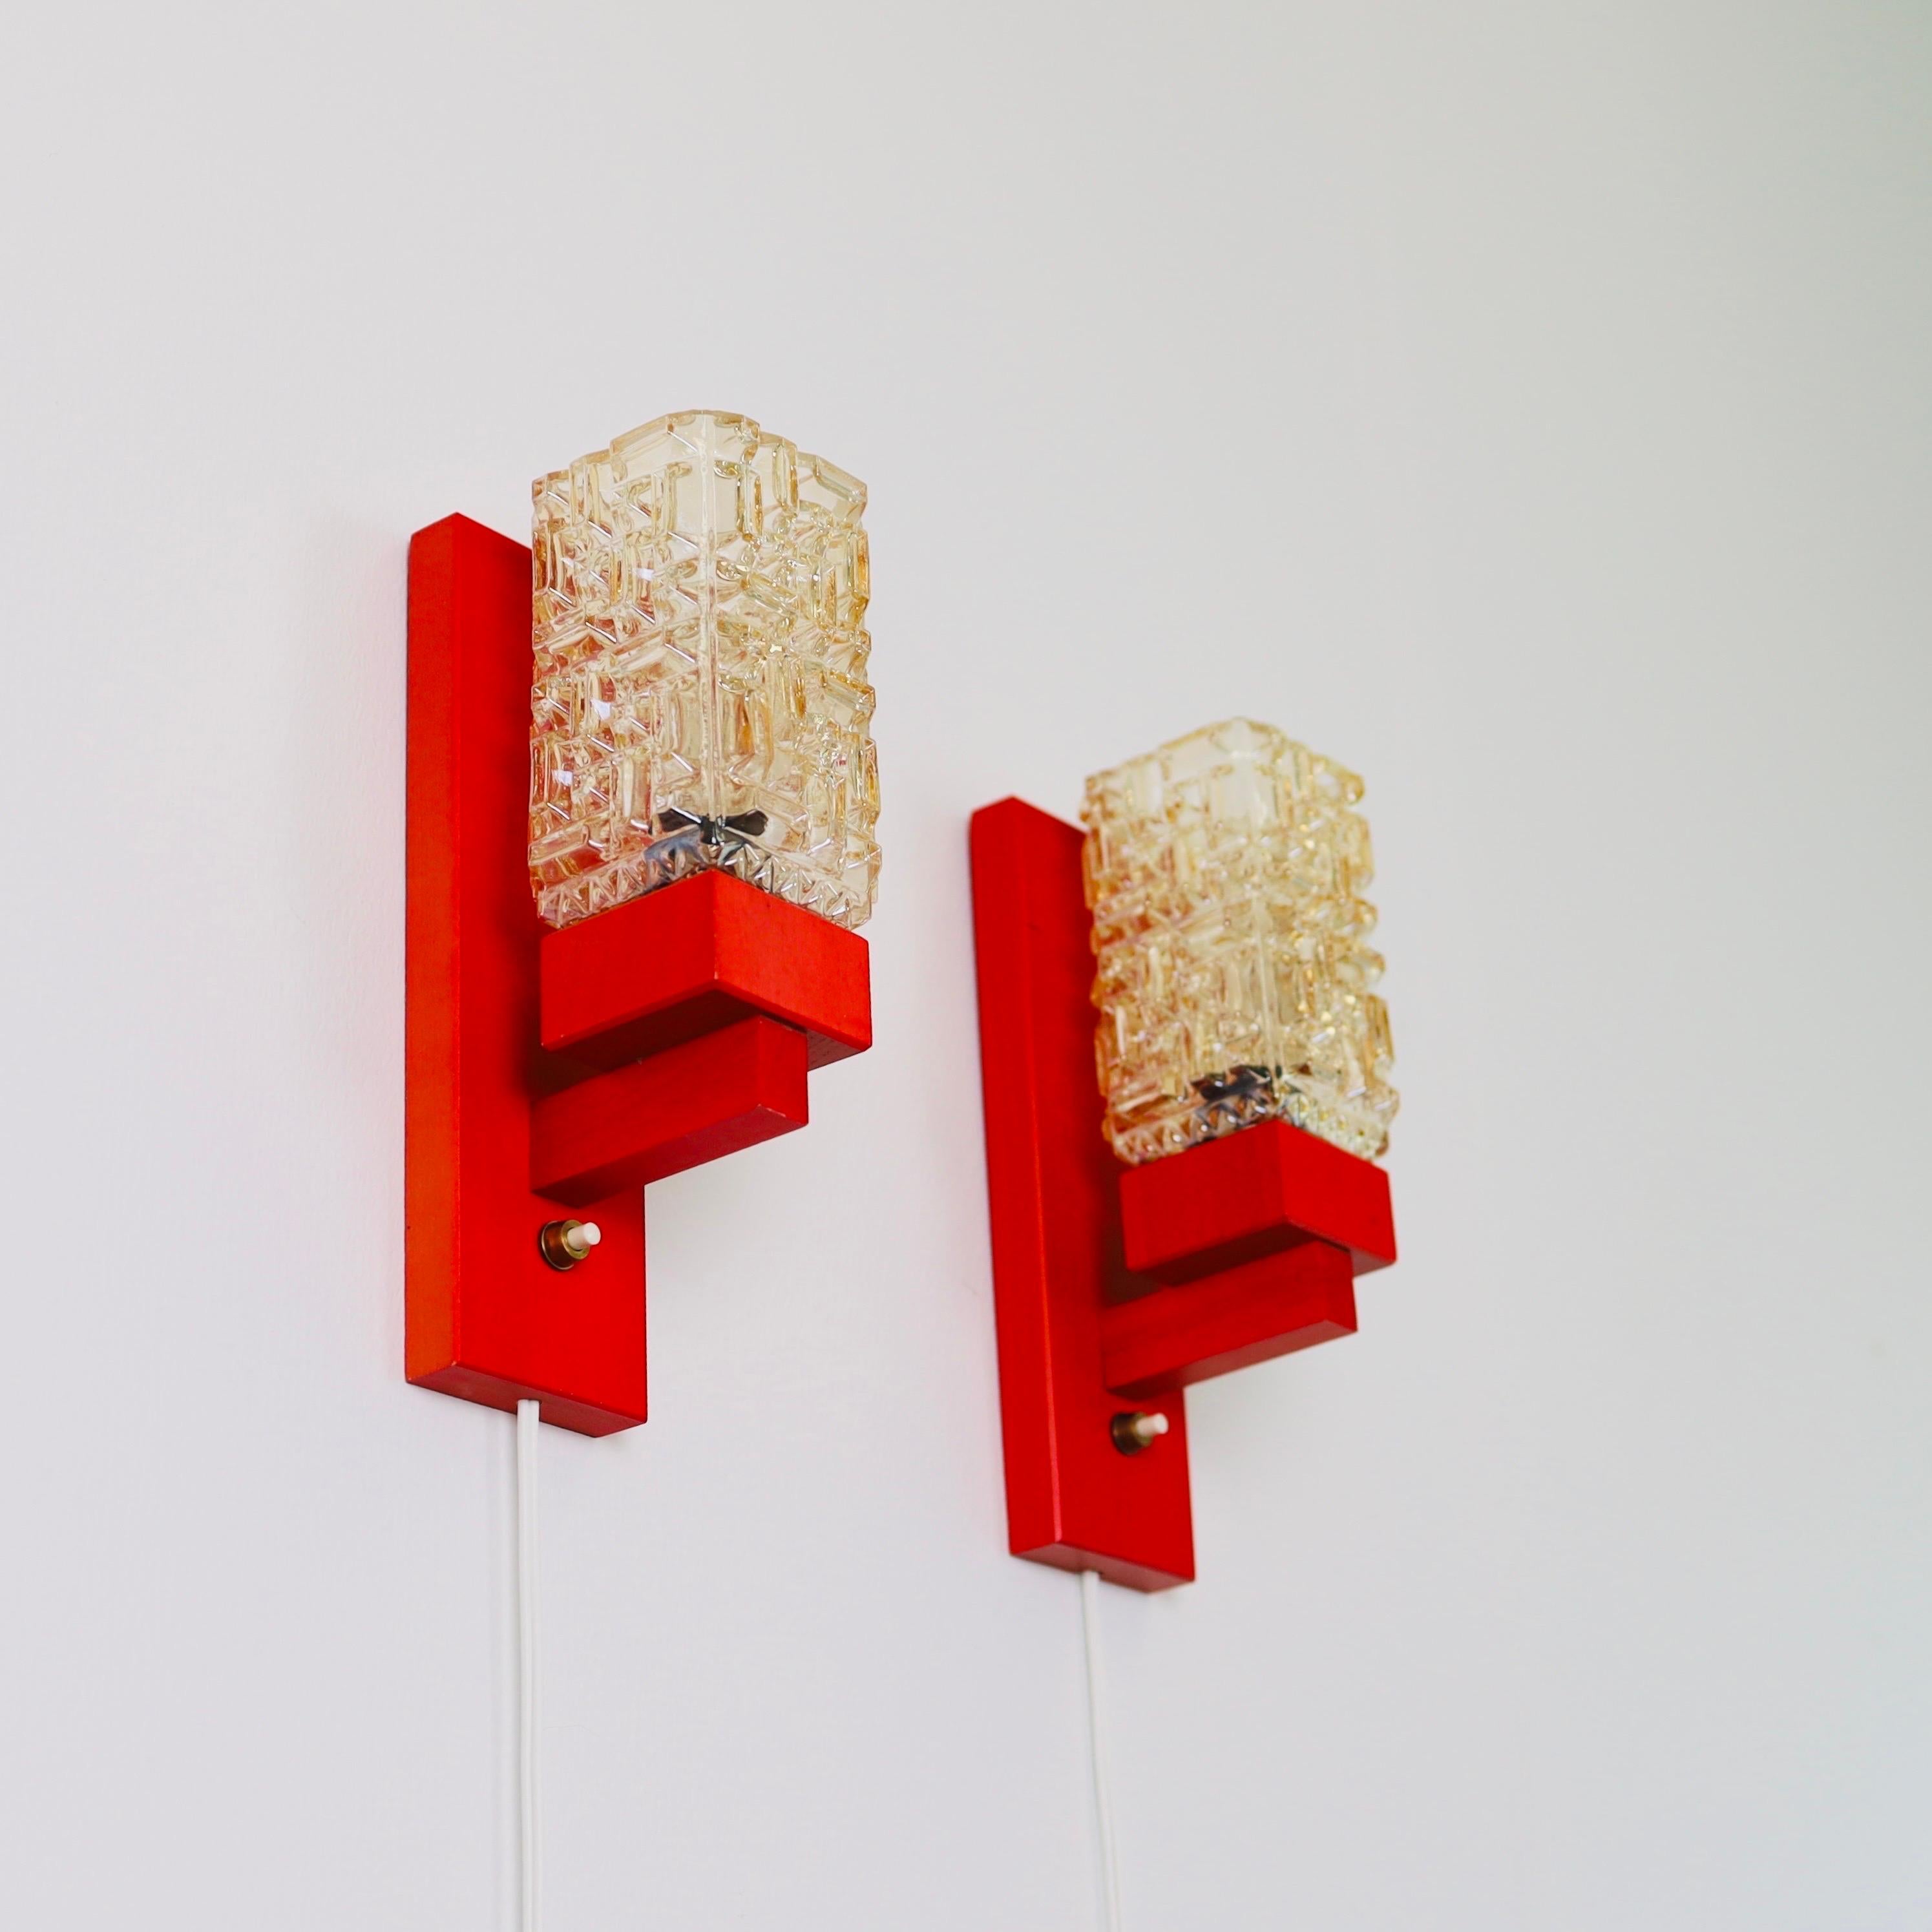 Danish Set of 'Vitrika' Wall Lamps in Red stained wood & Amber Glass, Denmark, 1970s For Sale